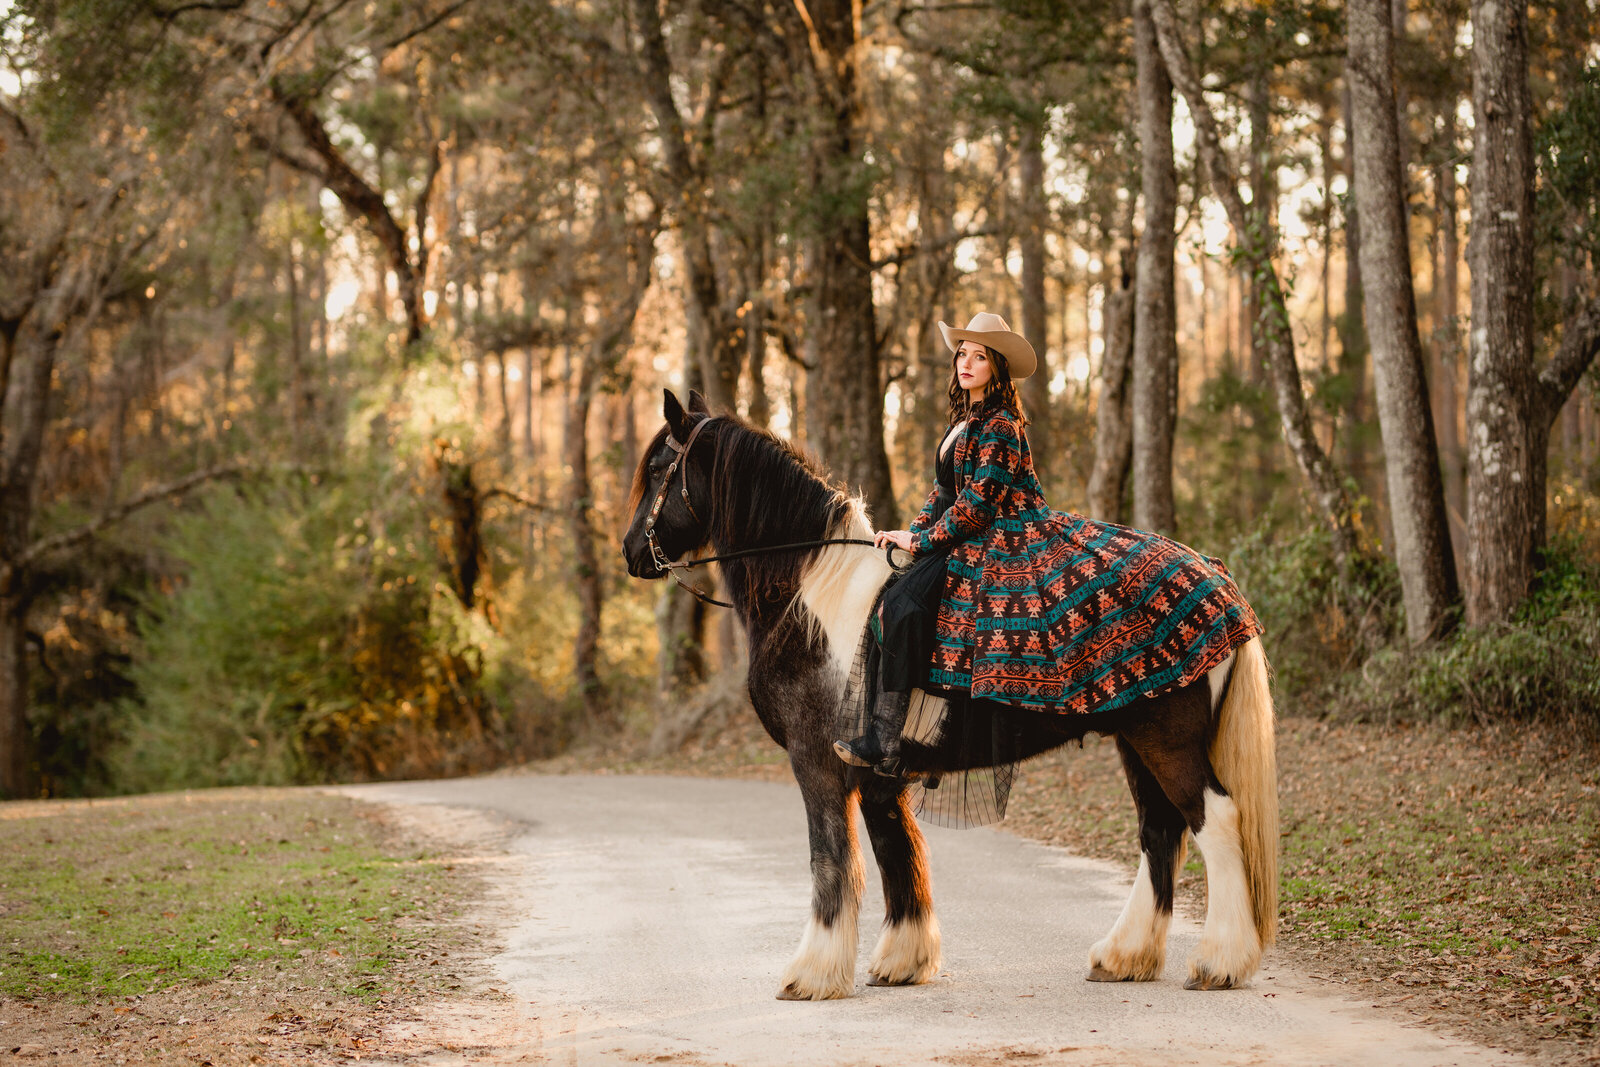 Gypsy vanner horse with cowgirl rider in Tallahassee, FL at sunset.